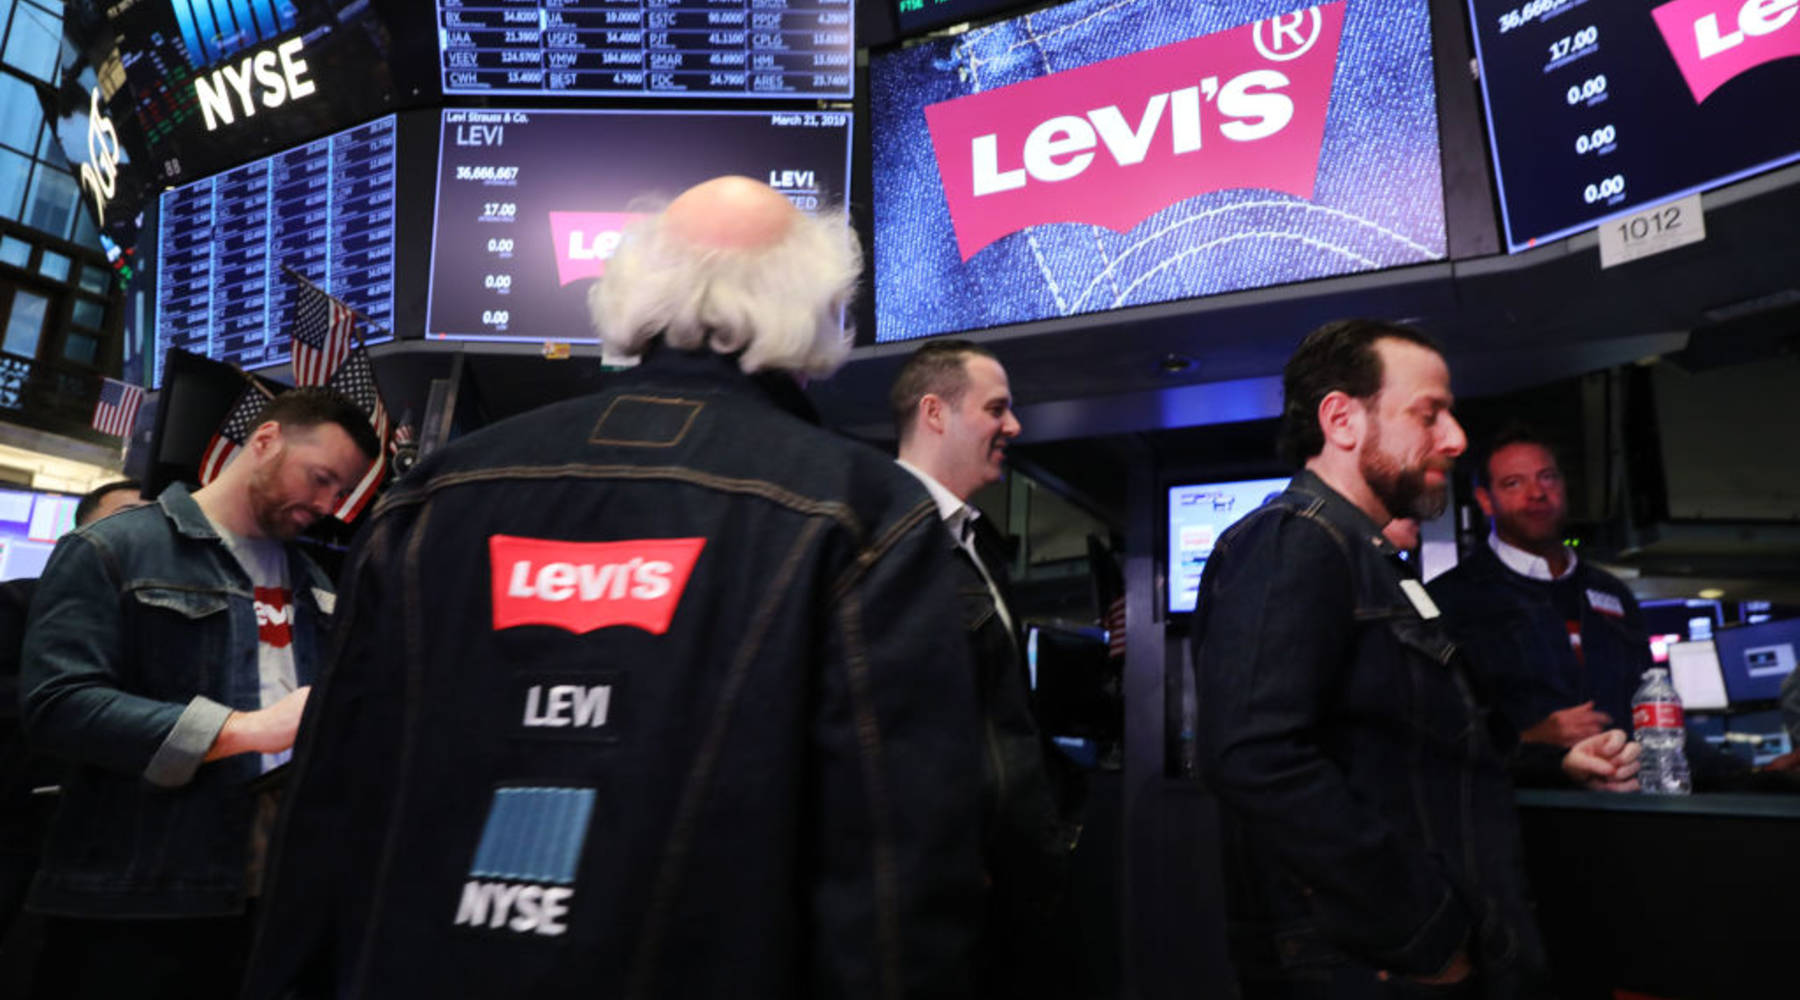 levis stock nyse